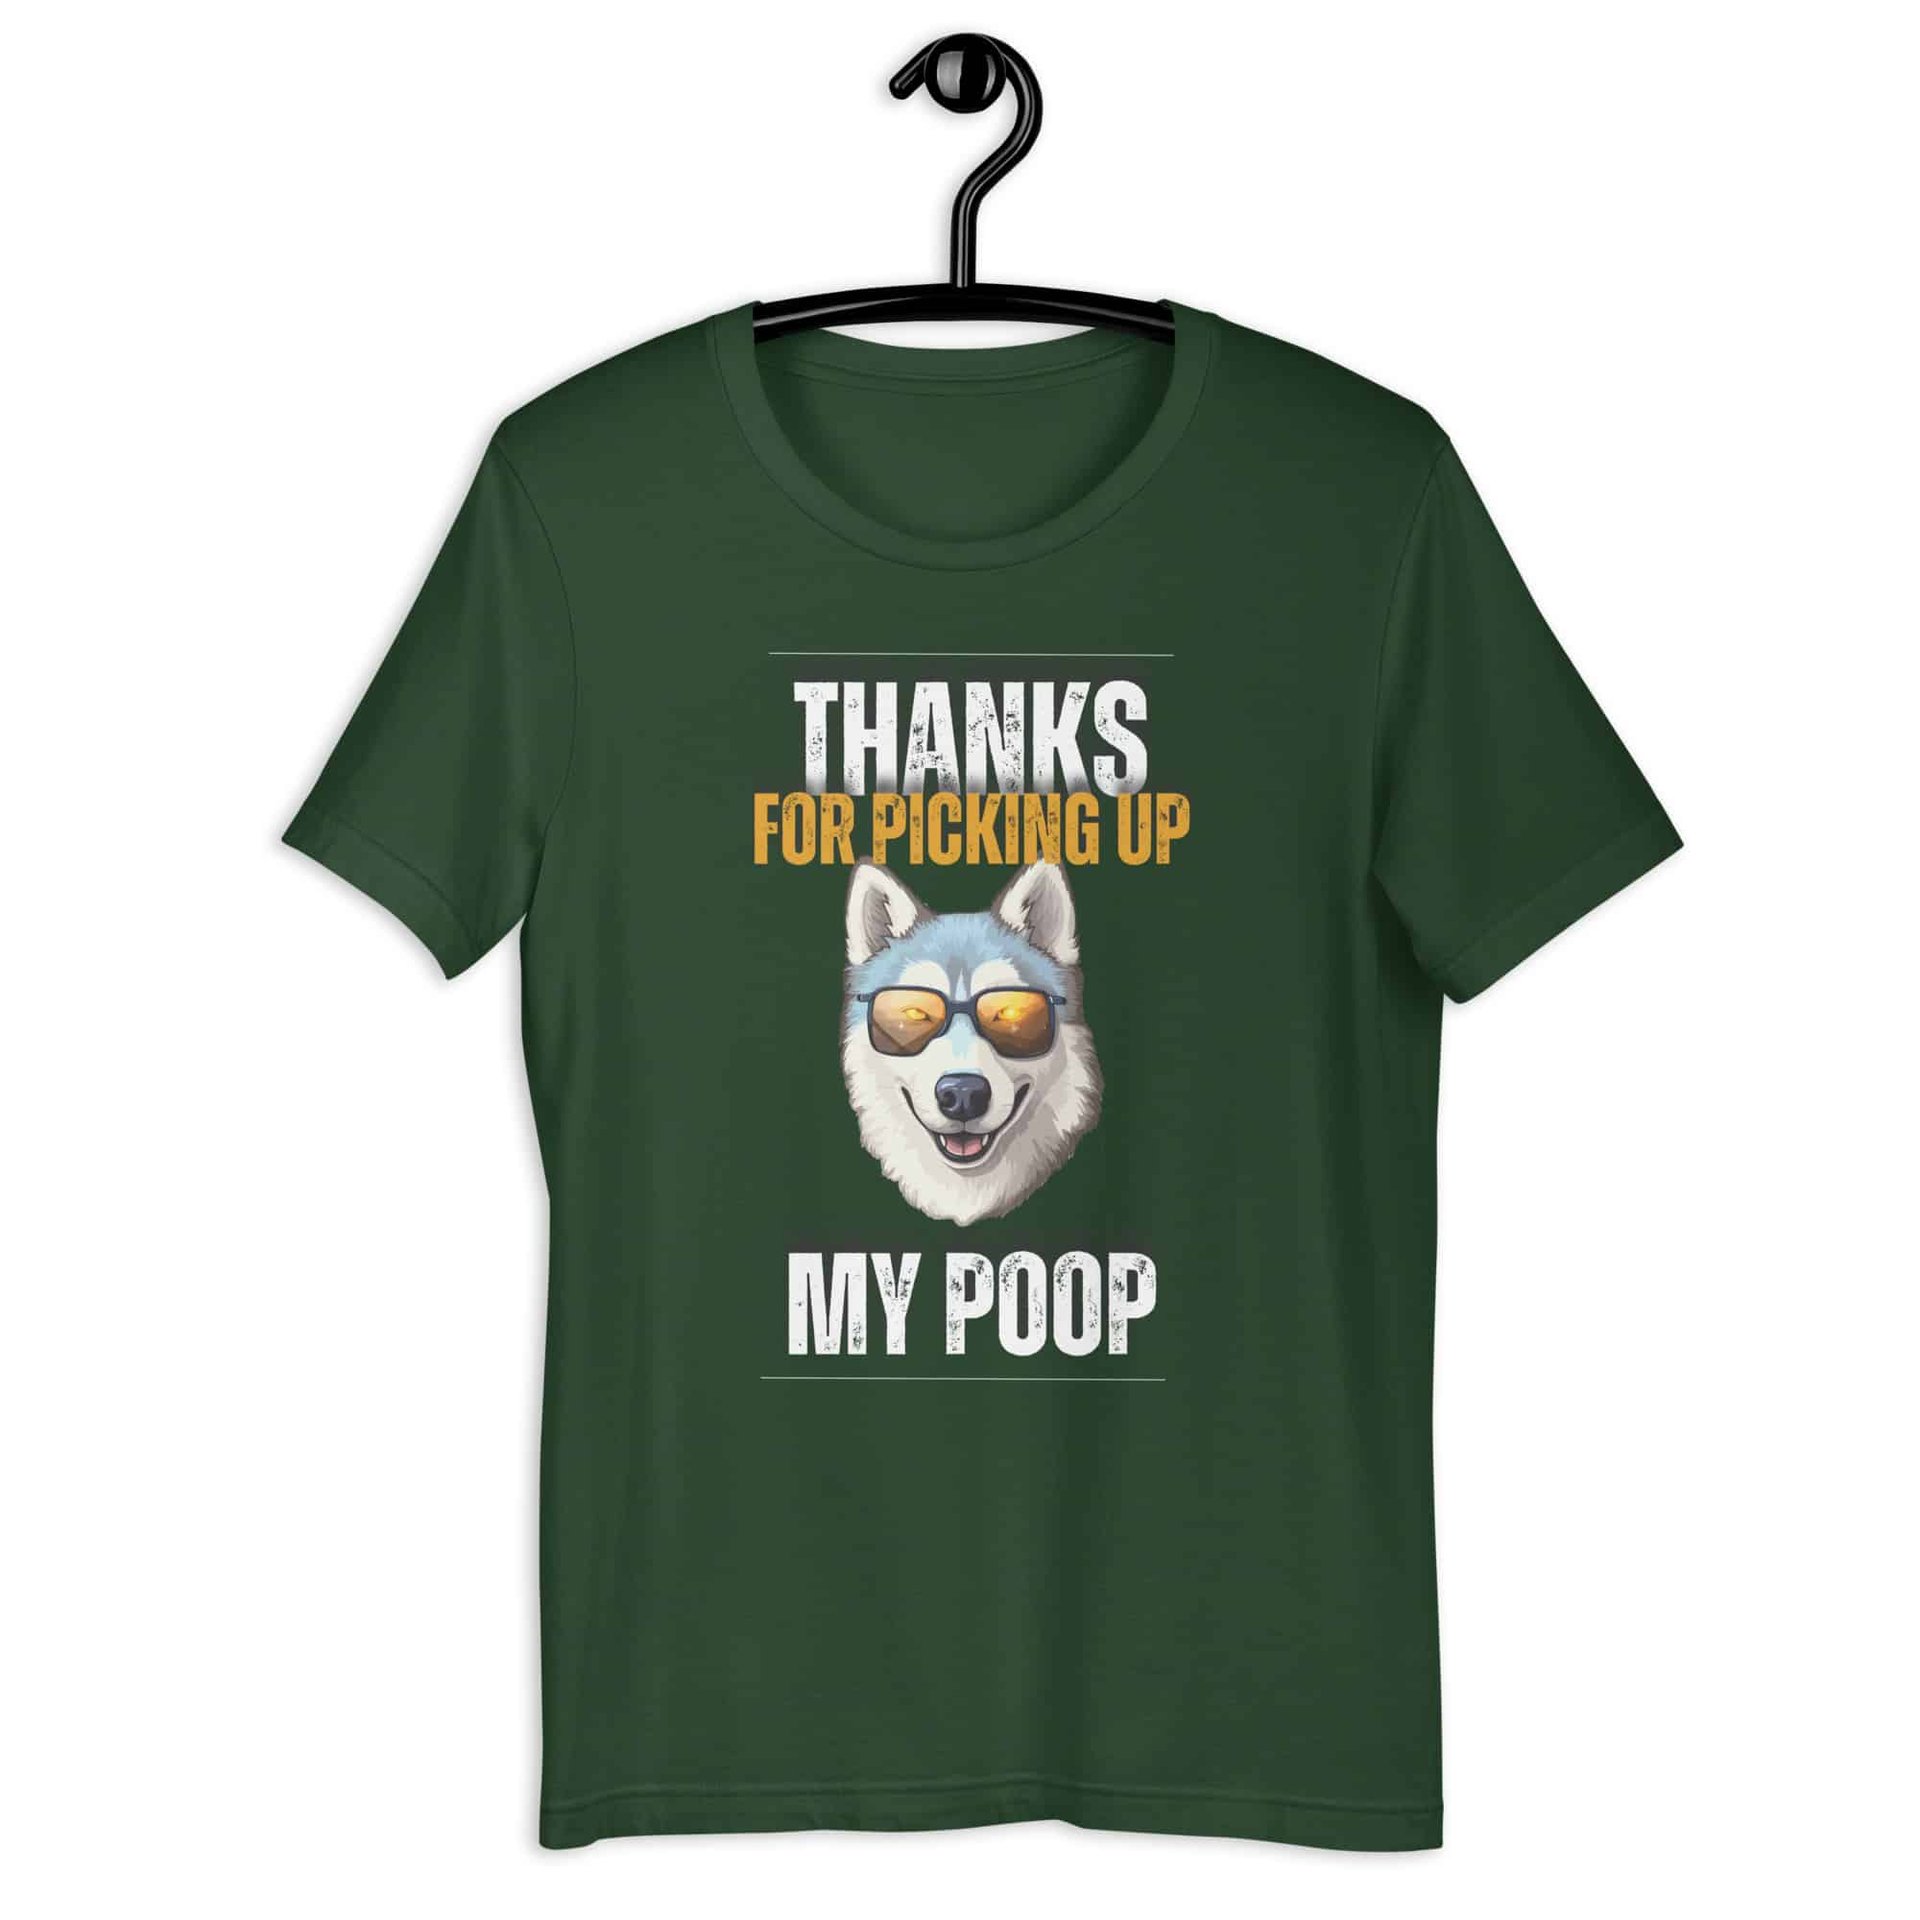 Thanks For Picking Up My POOP Funny Huskies Unisex T-Shirt. Forest